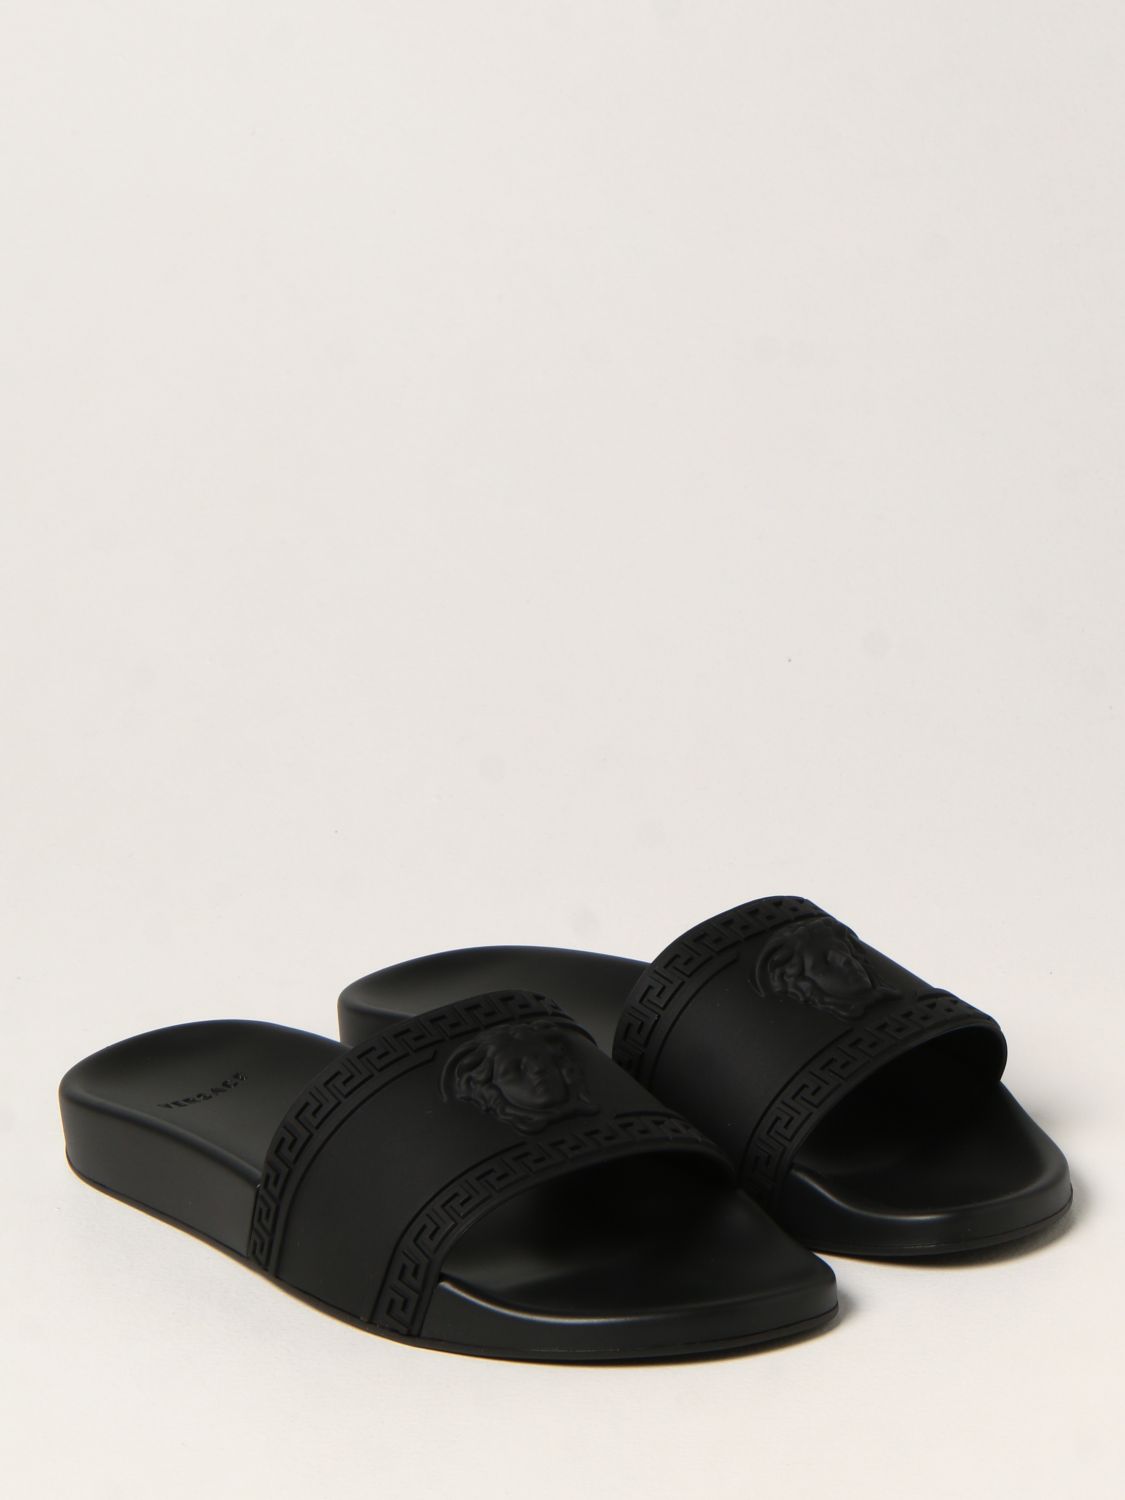 VERSACE: Palazzo rubber sandals with Medusa head - Black | Versace ...